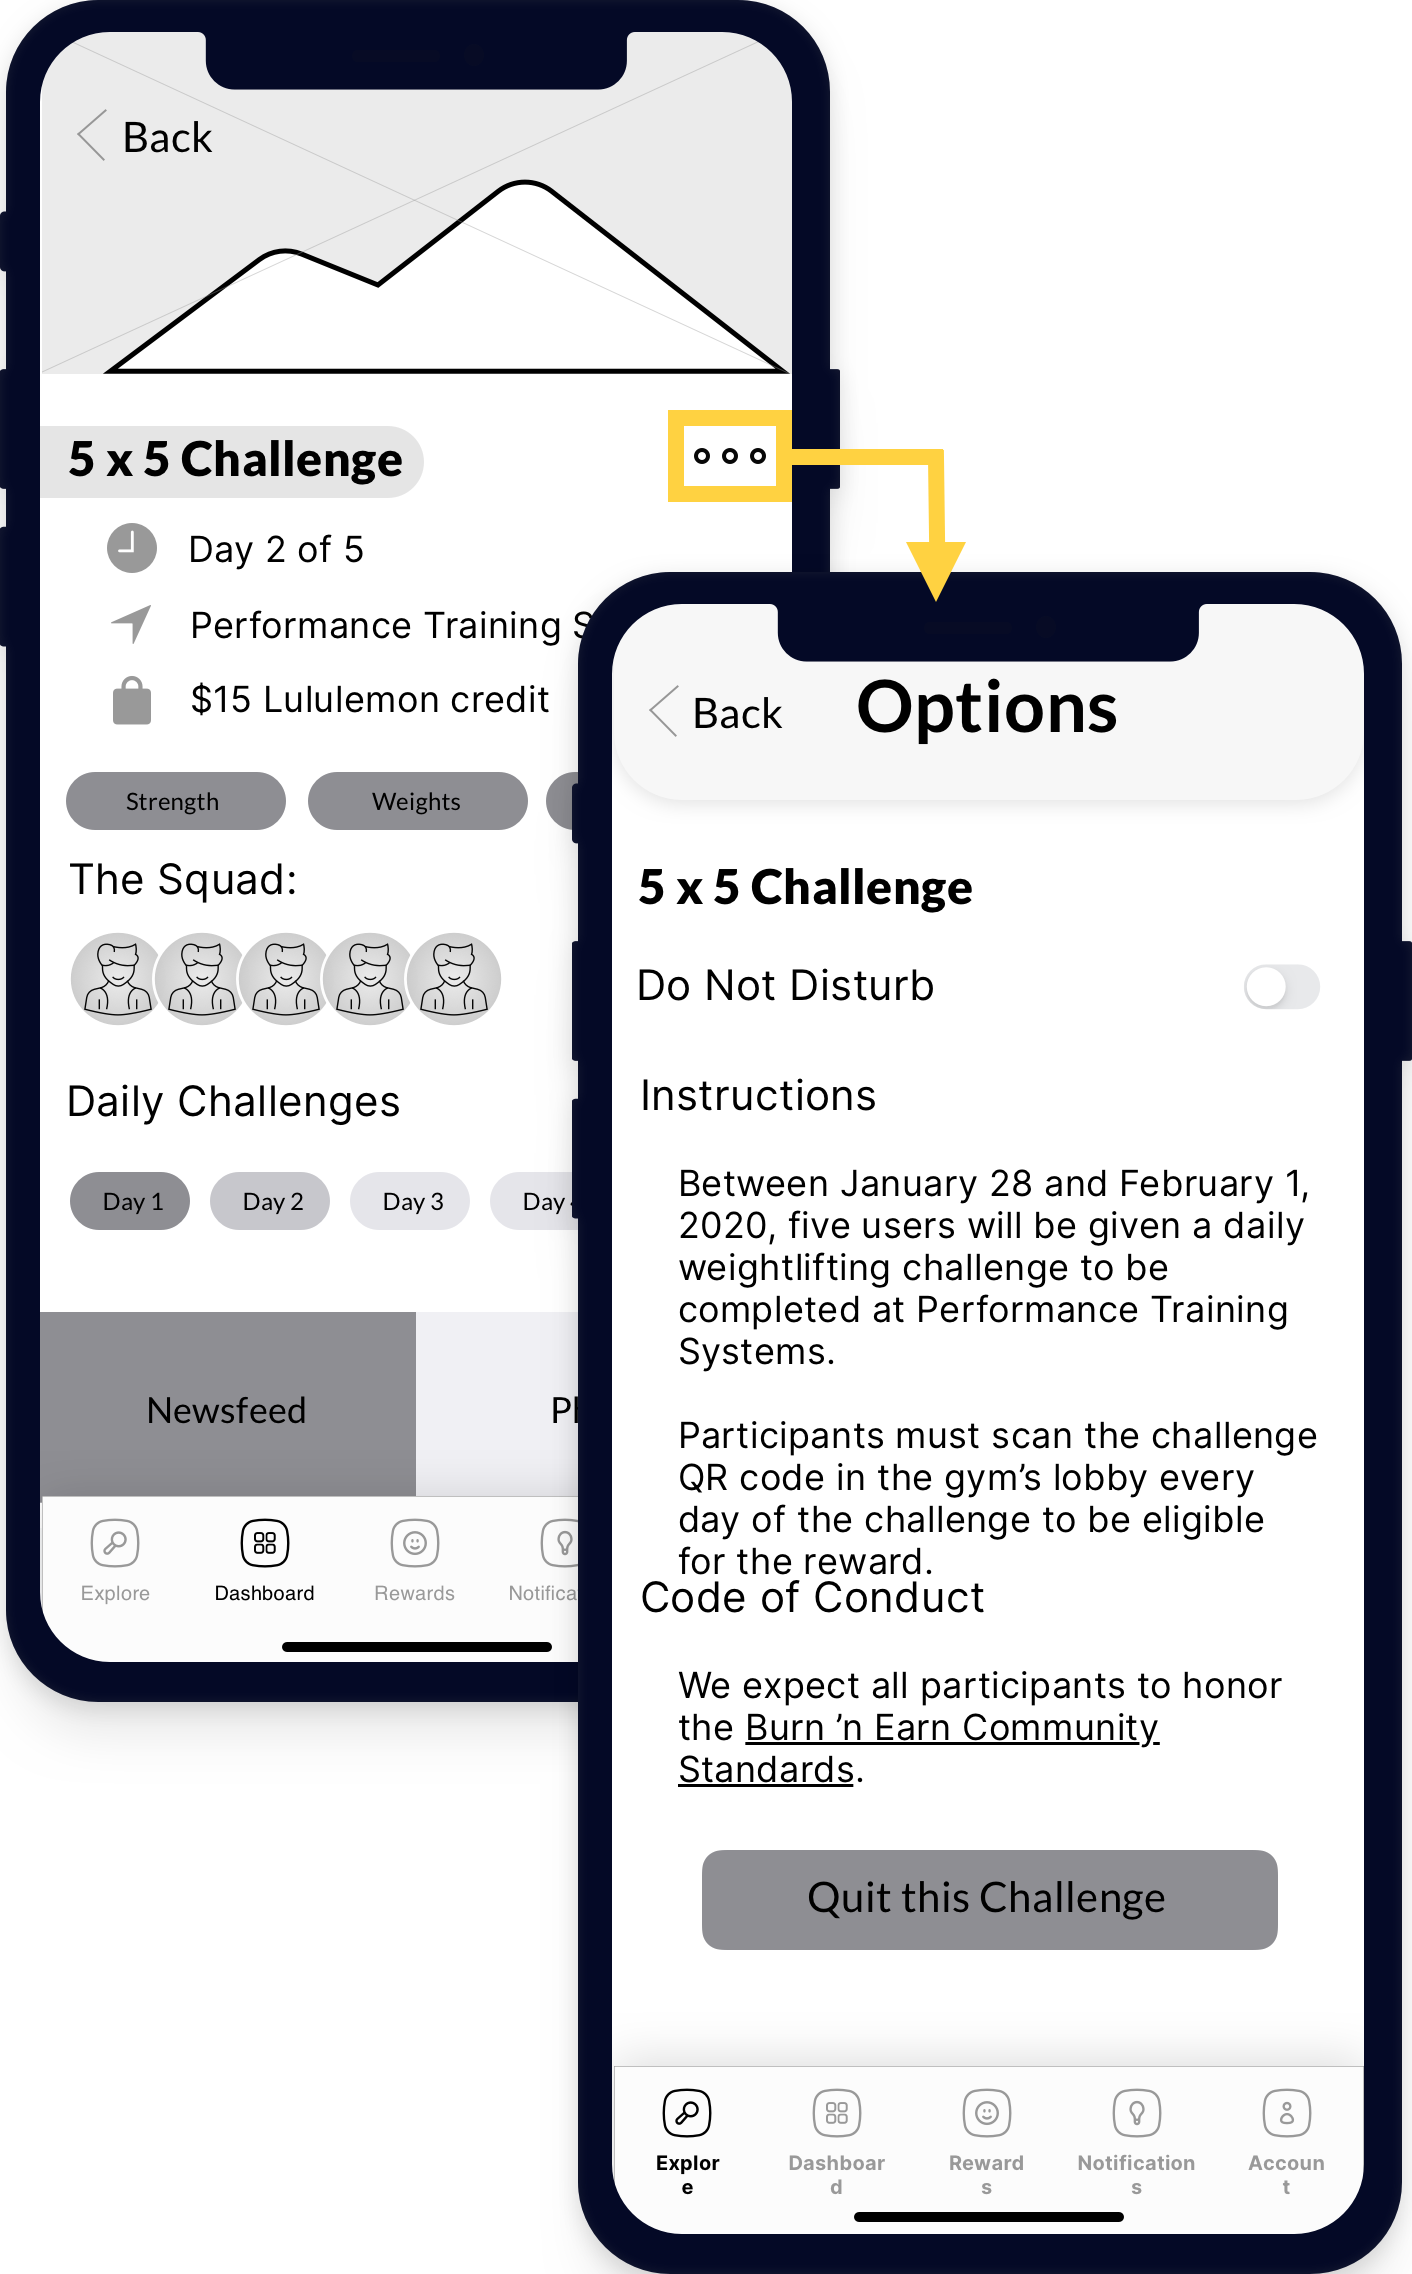 Image of a mobile app screen showing a finess challenge. There's a arrow pointing out a button for more options, and an image of an Options screen that shows instructions and an option to quit the challenge.